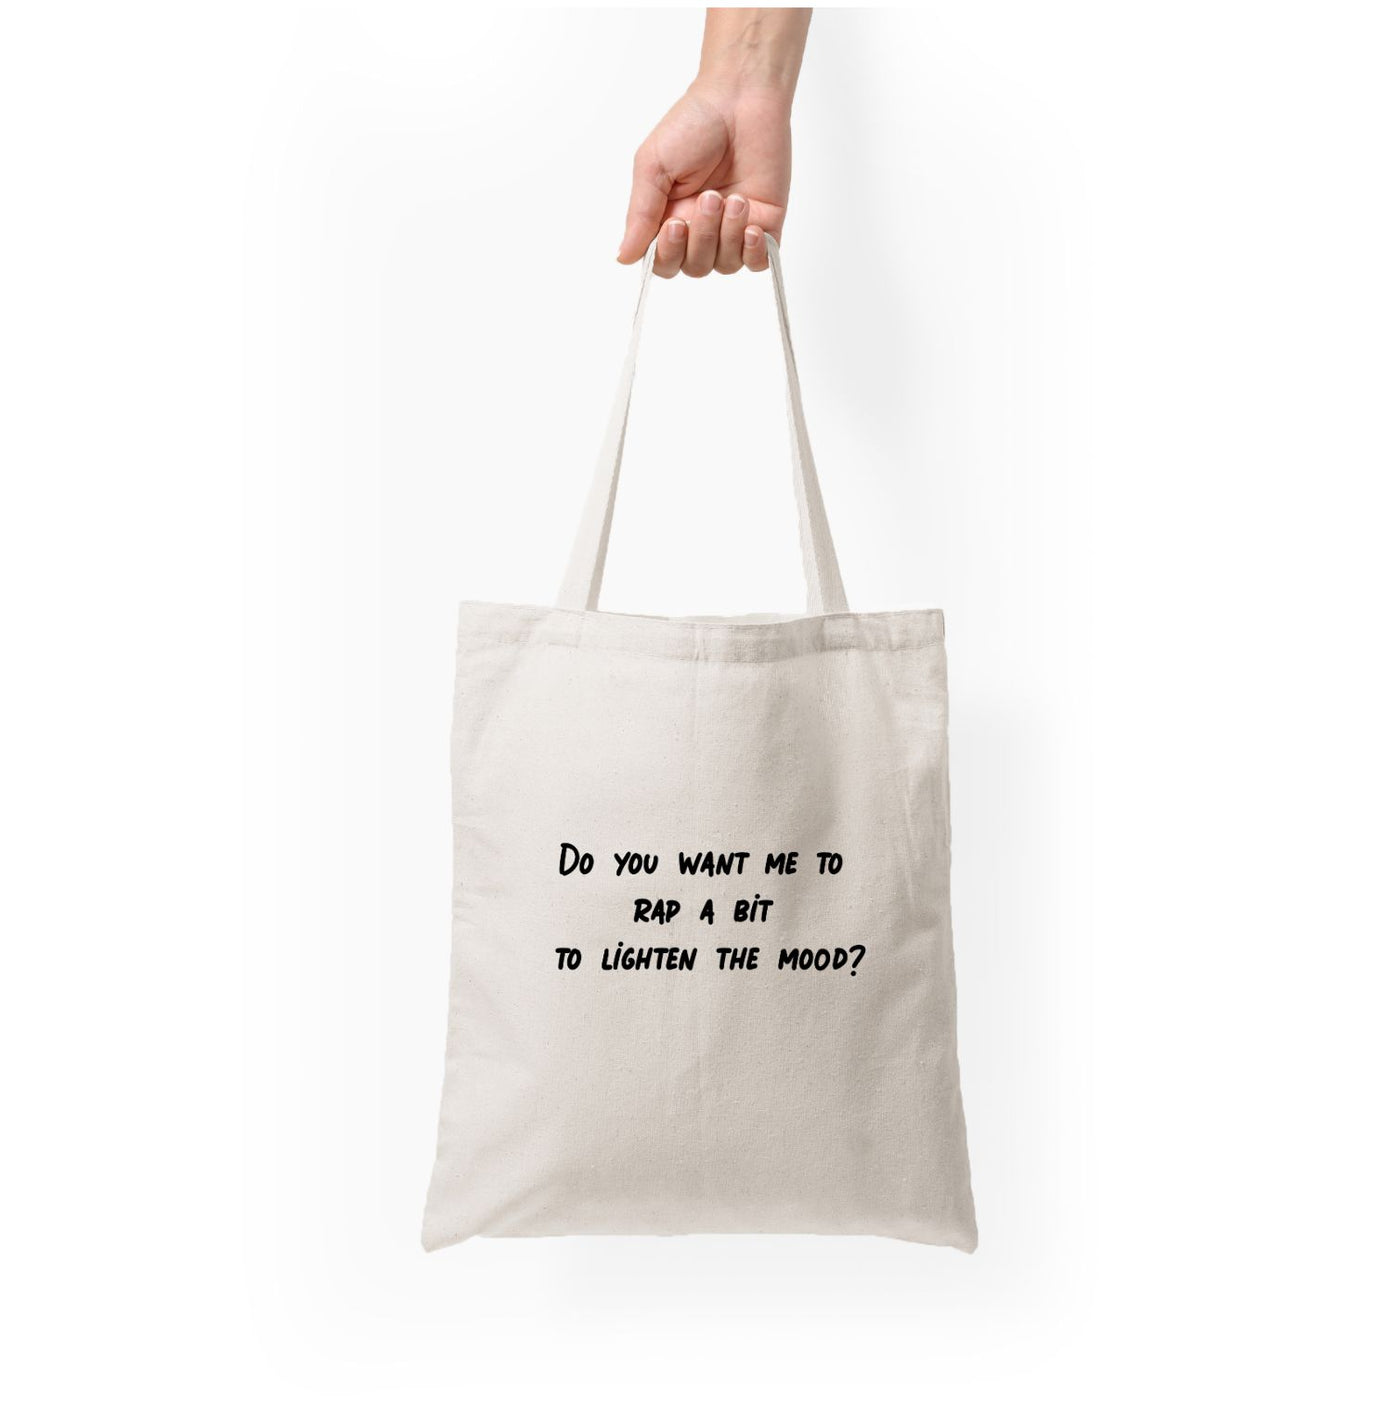 Do You Want Me To Rap A Bit To Lighten The Mood? - Islanders Tote Bag